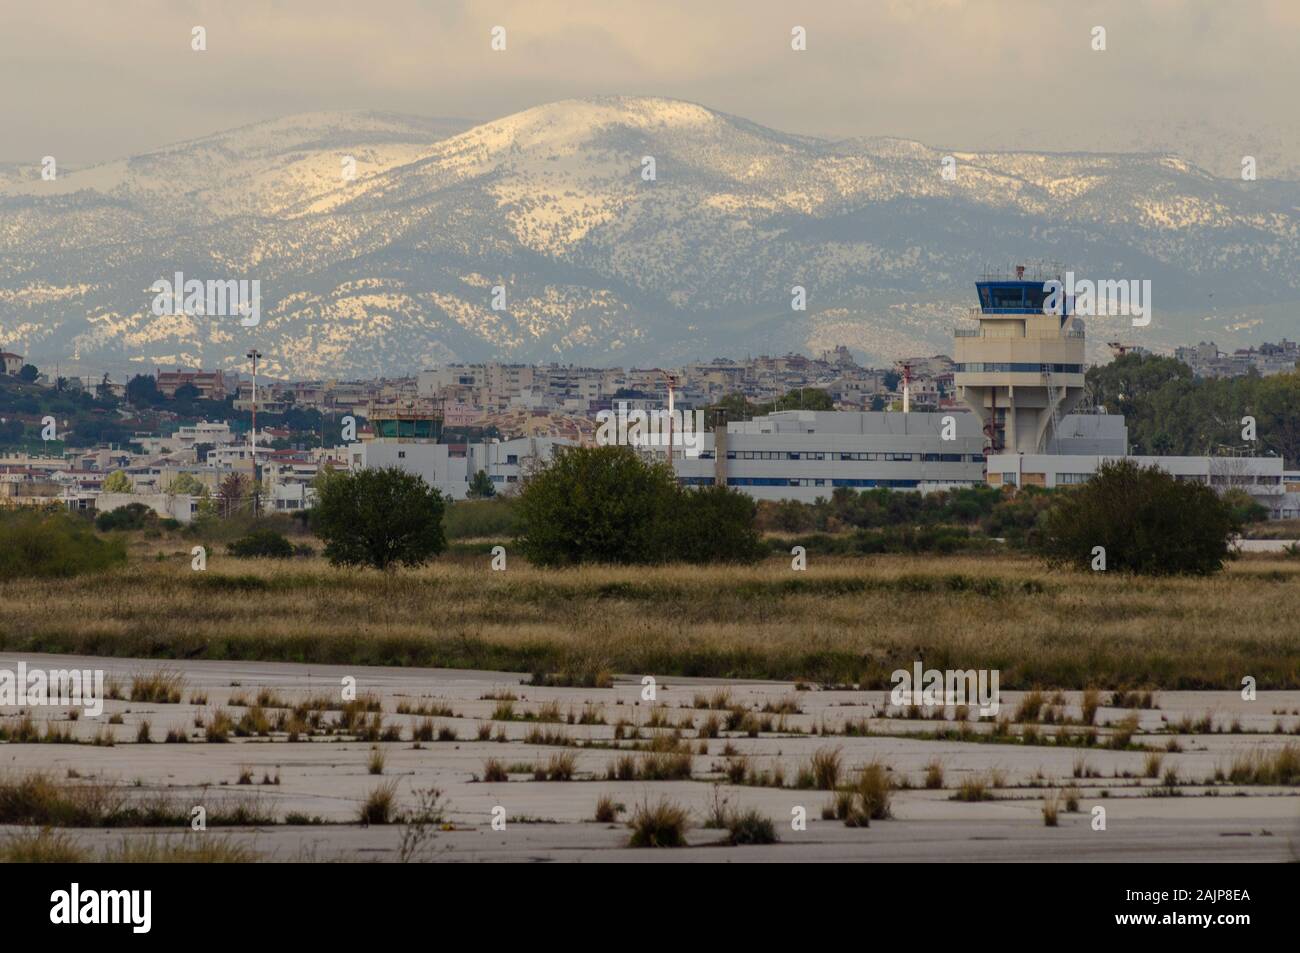 The old Hellinikon International Airport in Athens Greece Stock Photo